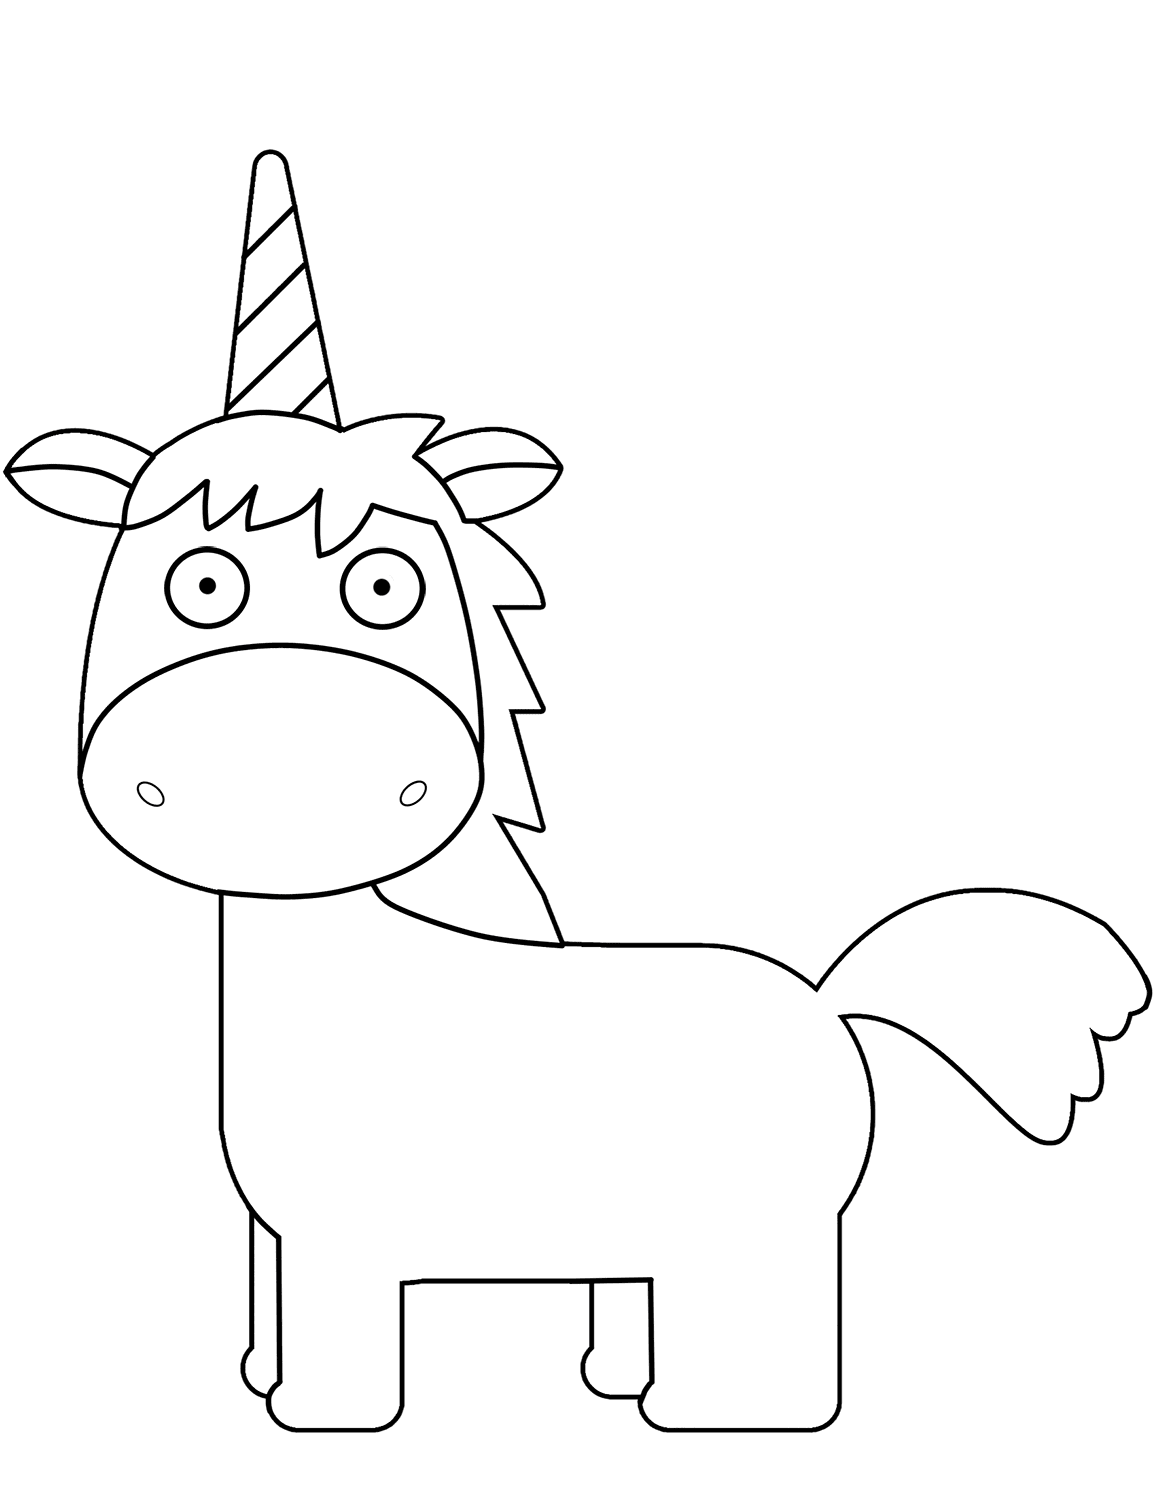 Cartoon Unicorn Horn Coloring Page